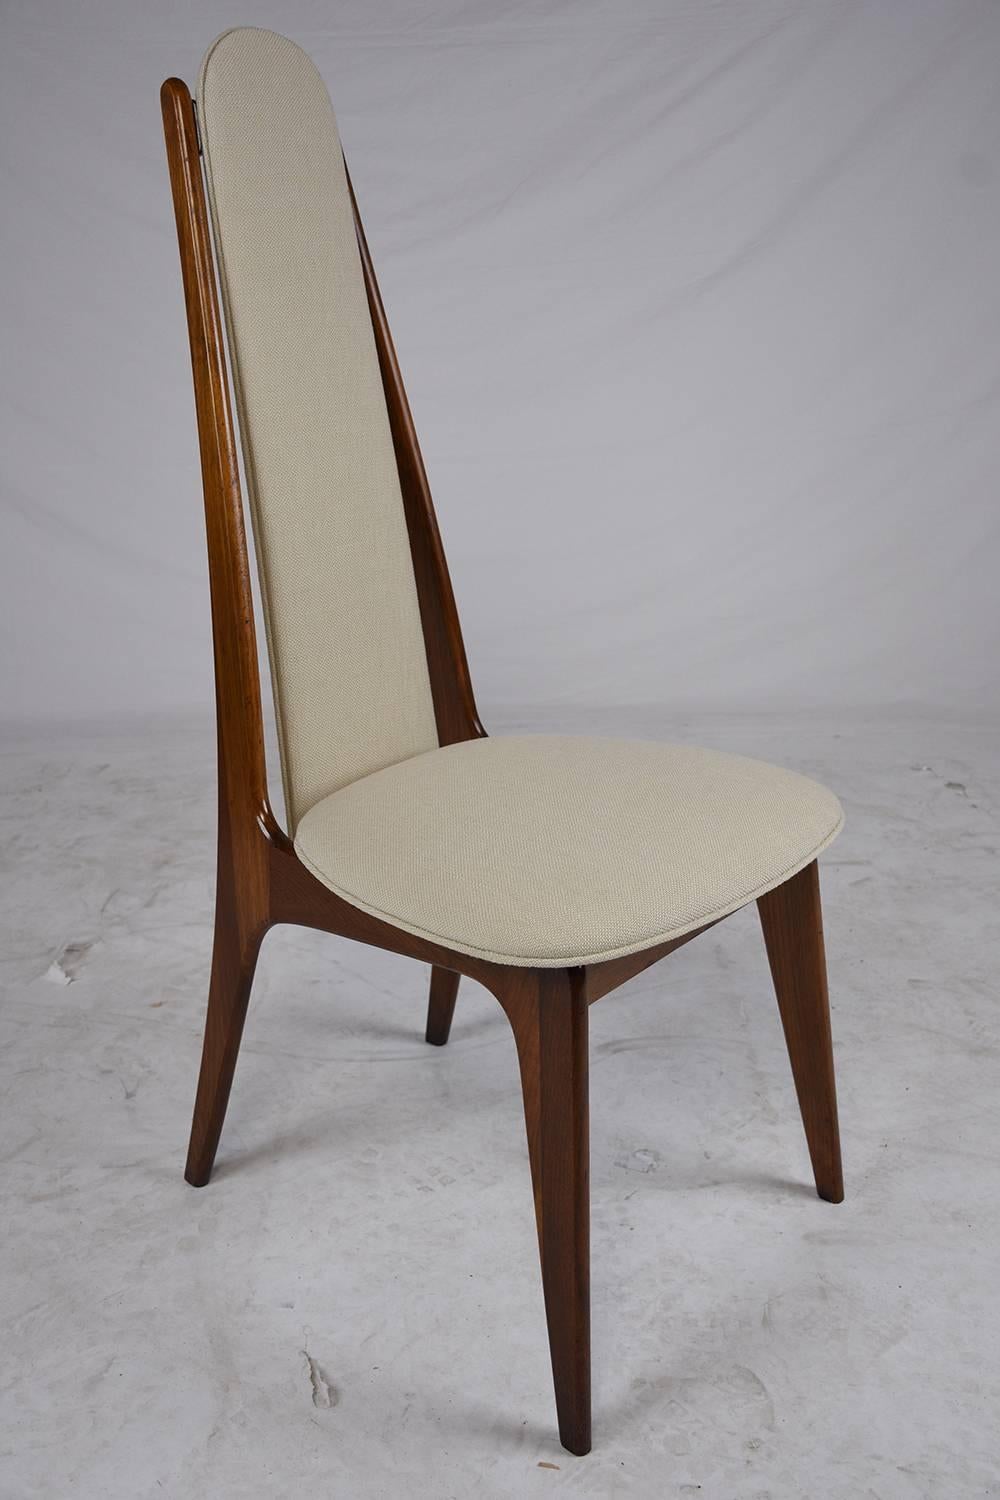 adrian pearsall dining chair